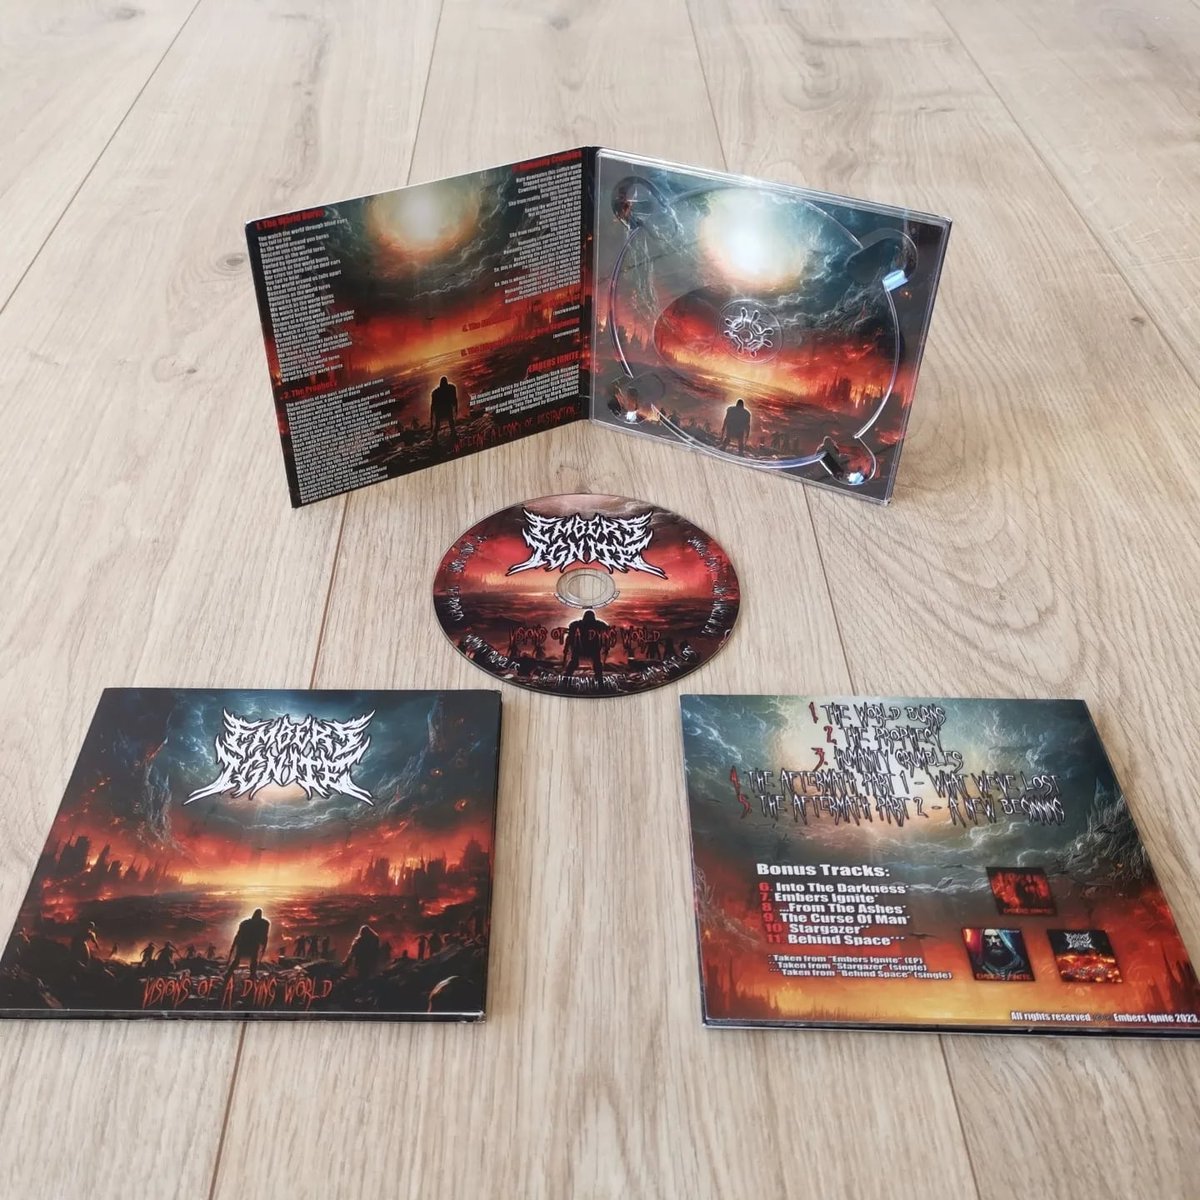 CDs of my latest EP 'Visions Of A Dying World' are available from my Bandcamp!
Only £6 and you get all previous released songs as bonus tracks!
Bargain!
embersignite.bandcamp.com/album/visions-…
#metal #melodeath #deathmetal #heavymetal #melodicdeathmetal #bandcamp #ukmetal #underground #indie